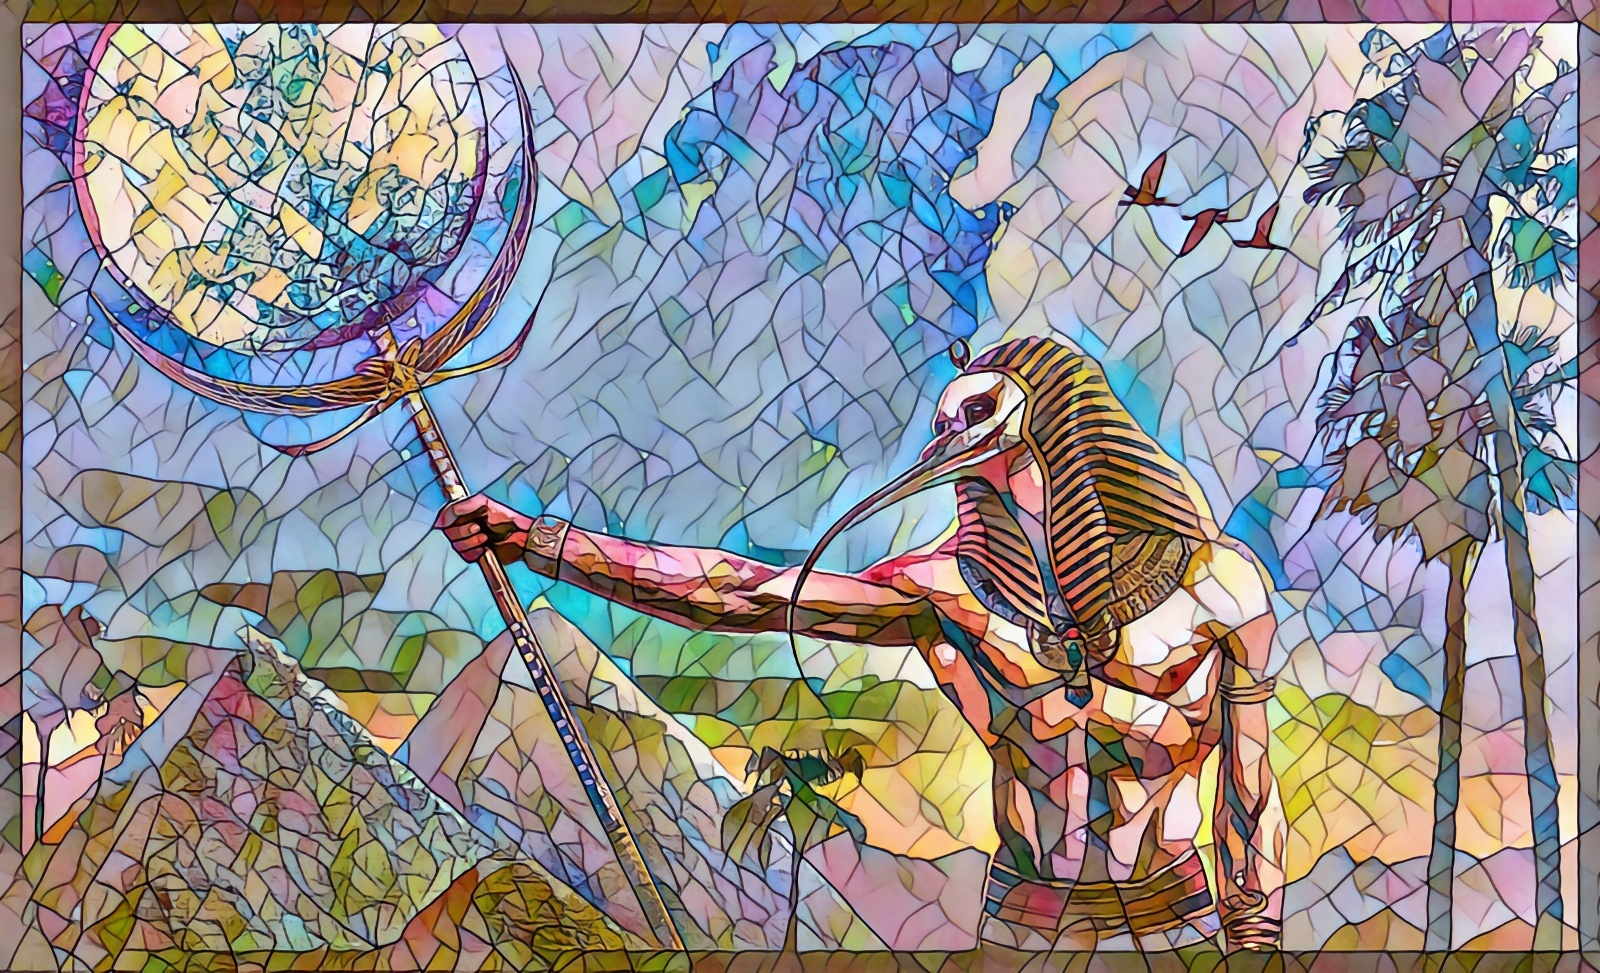 Egyptian god with moon sceptre in hand